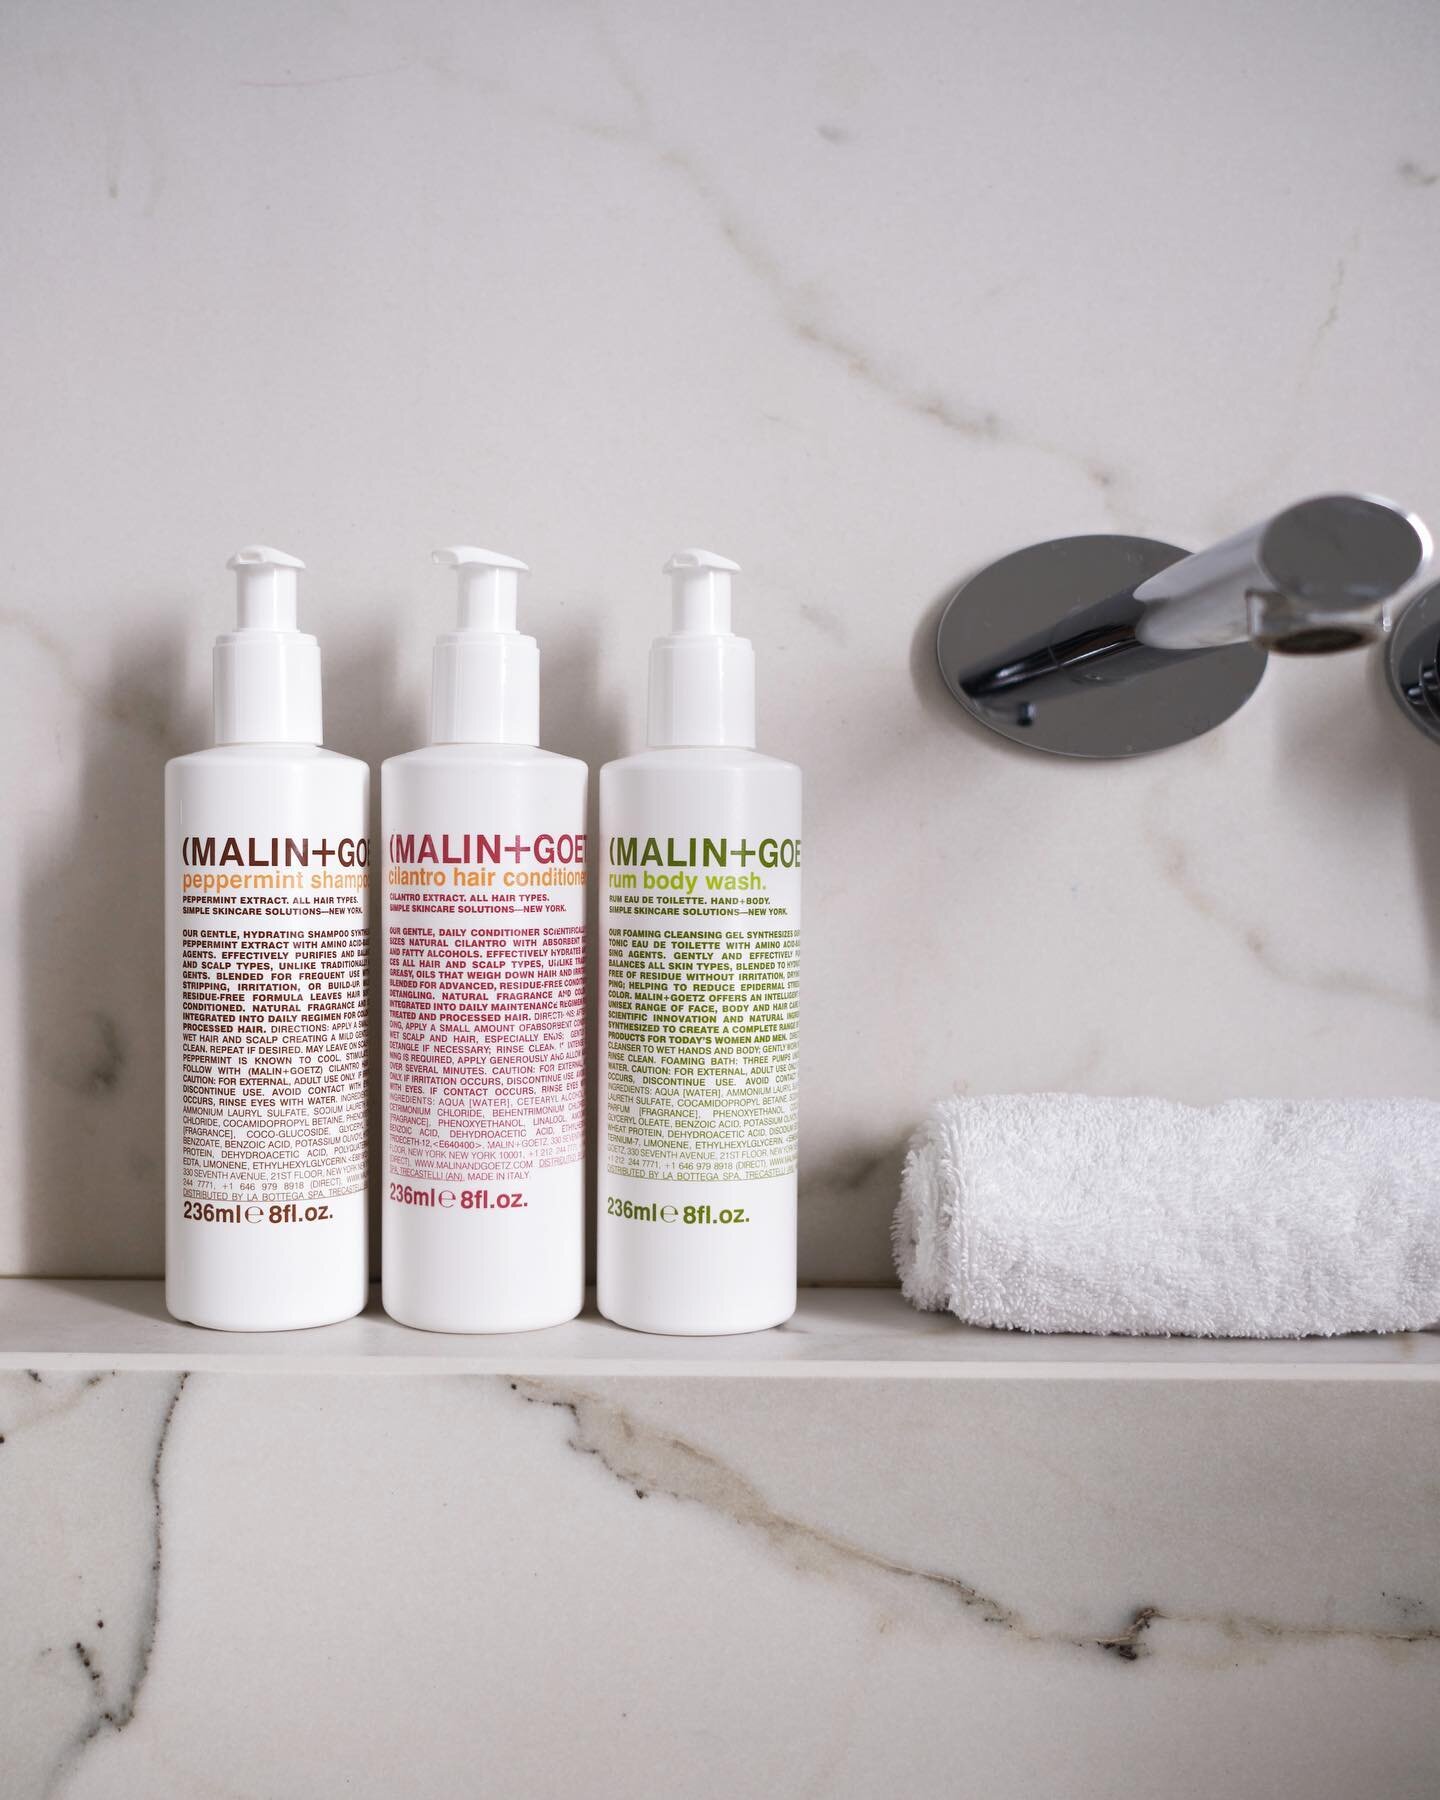 Our bathroom regime just got an update with some signature #malinandgoetz products. Enjoy!